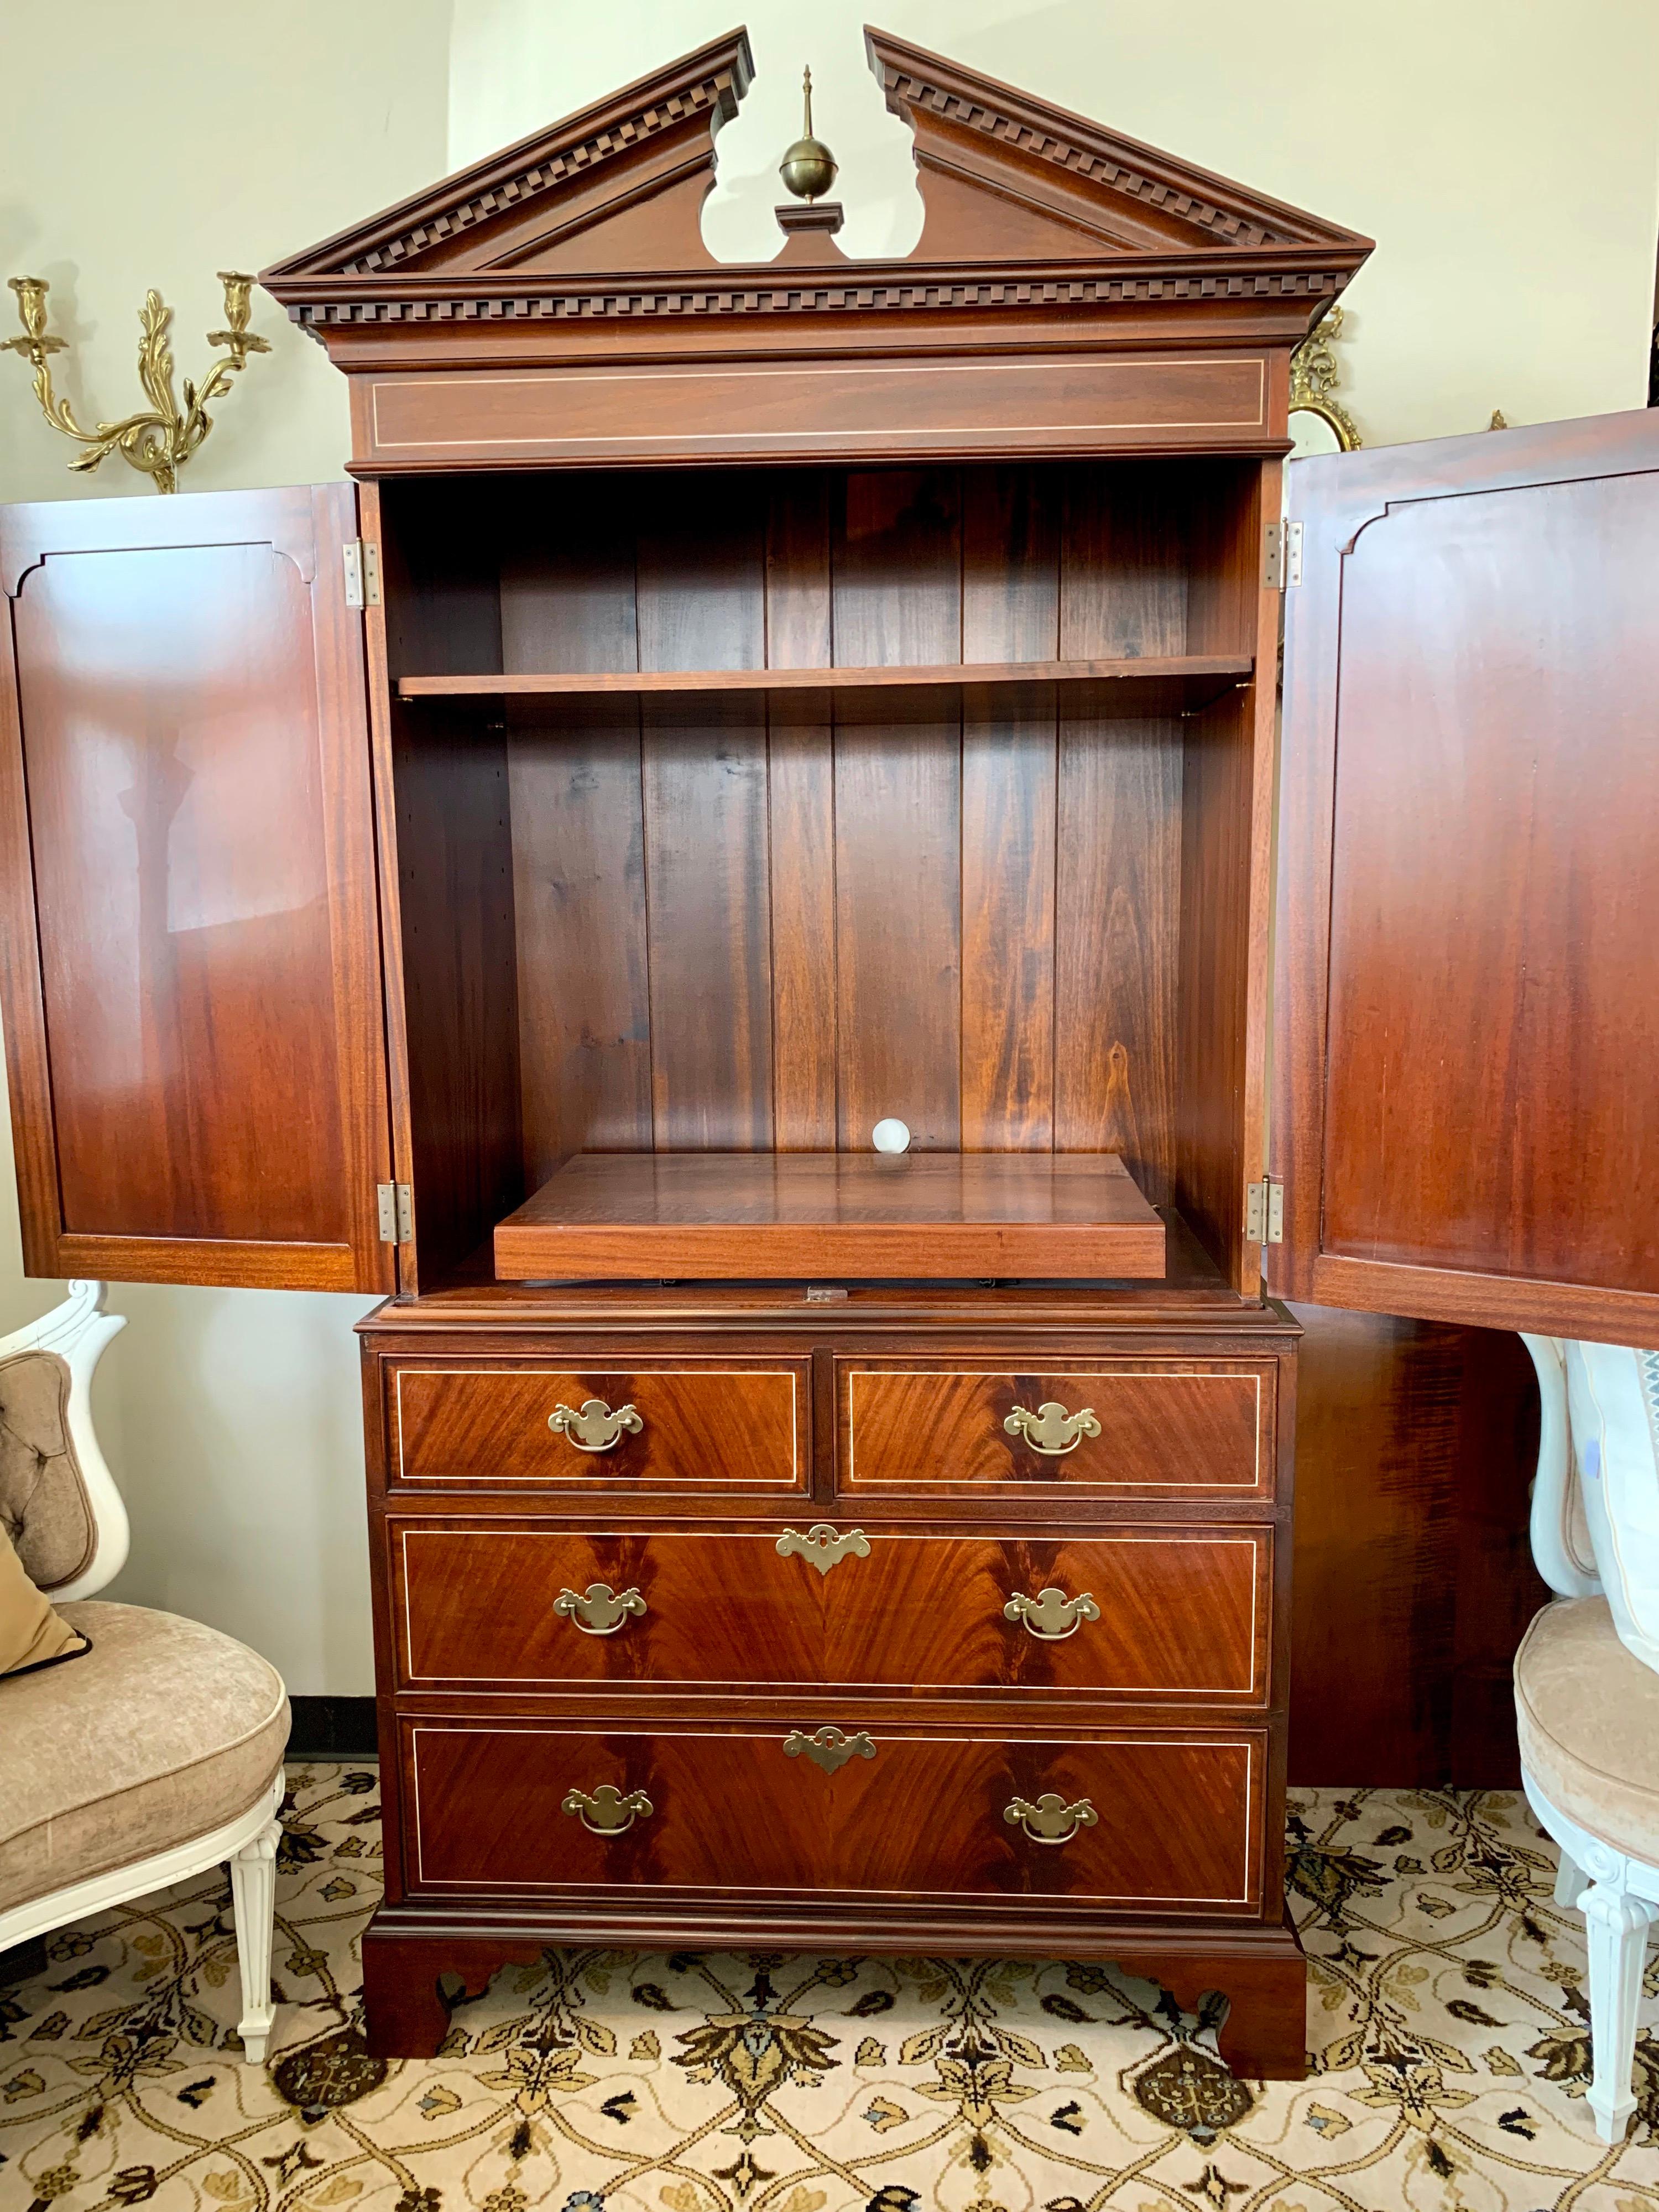 Handcrafted armoire with boxwood line inlay and crossbanded mahogany has two front doors that open to store a TV or add two shelves to store clothing. Beautiful dentil molding on top with a brass finial. A beautiful antique reproduction of an 18th